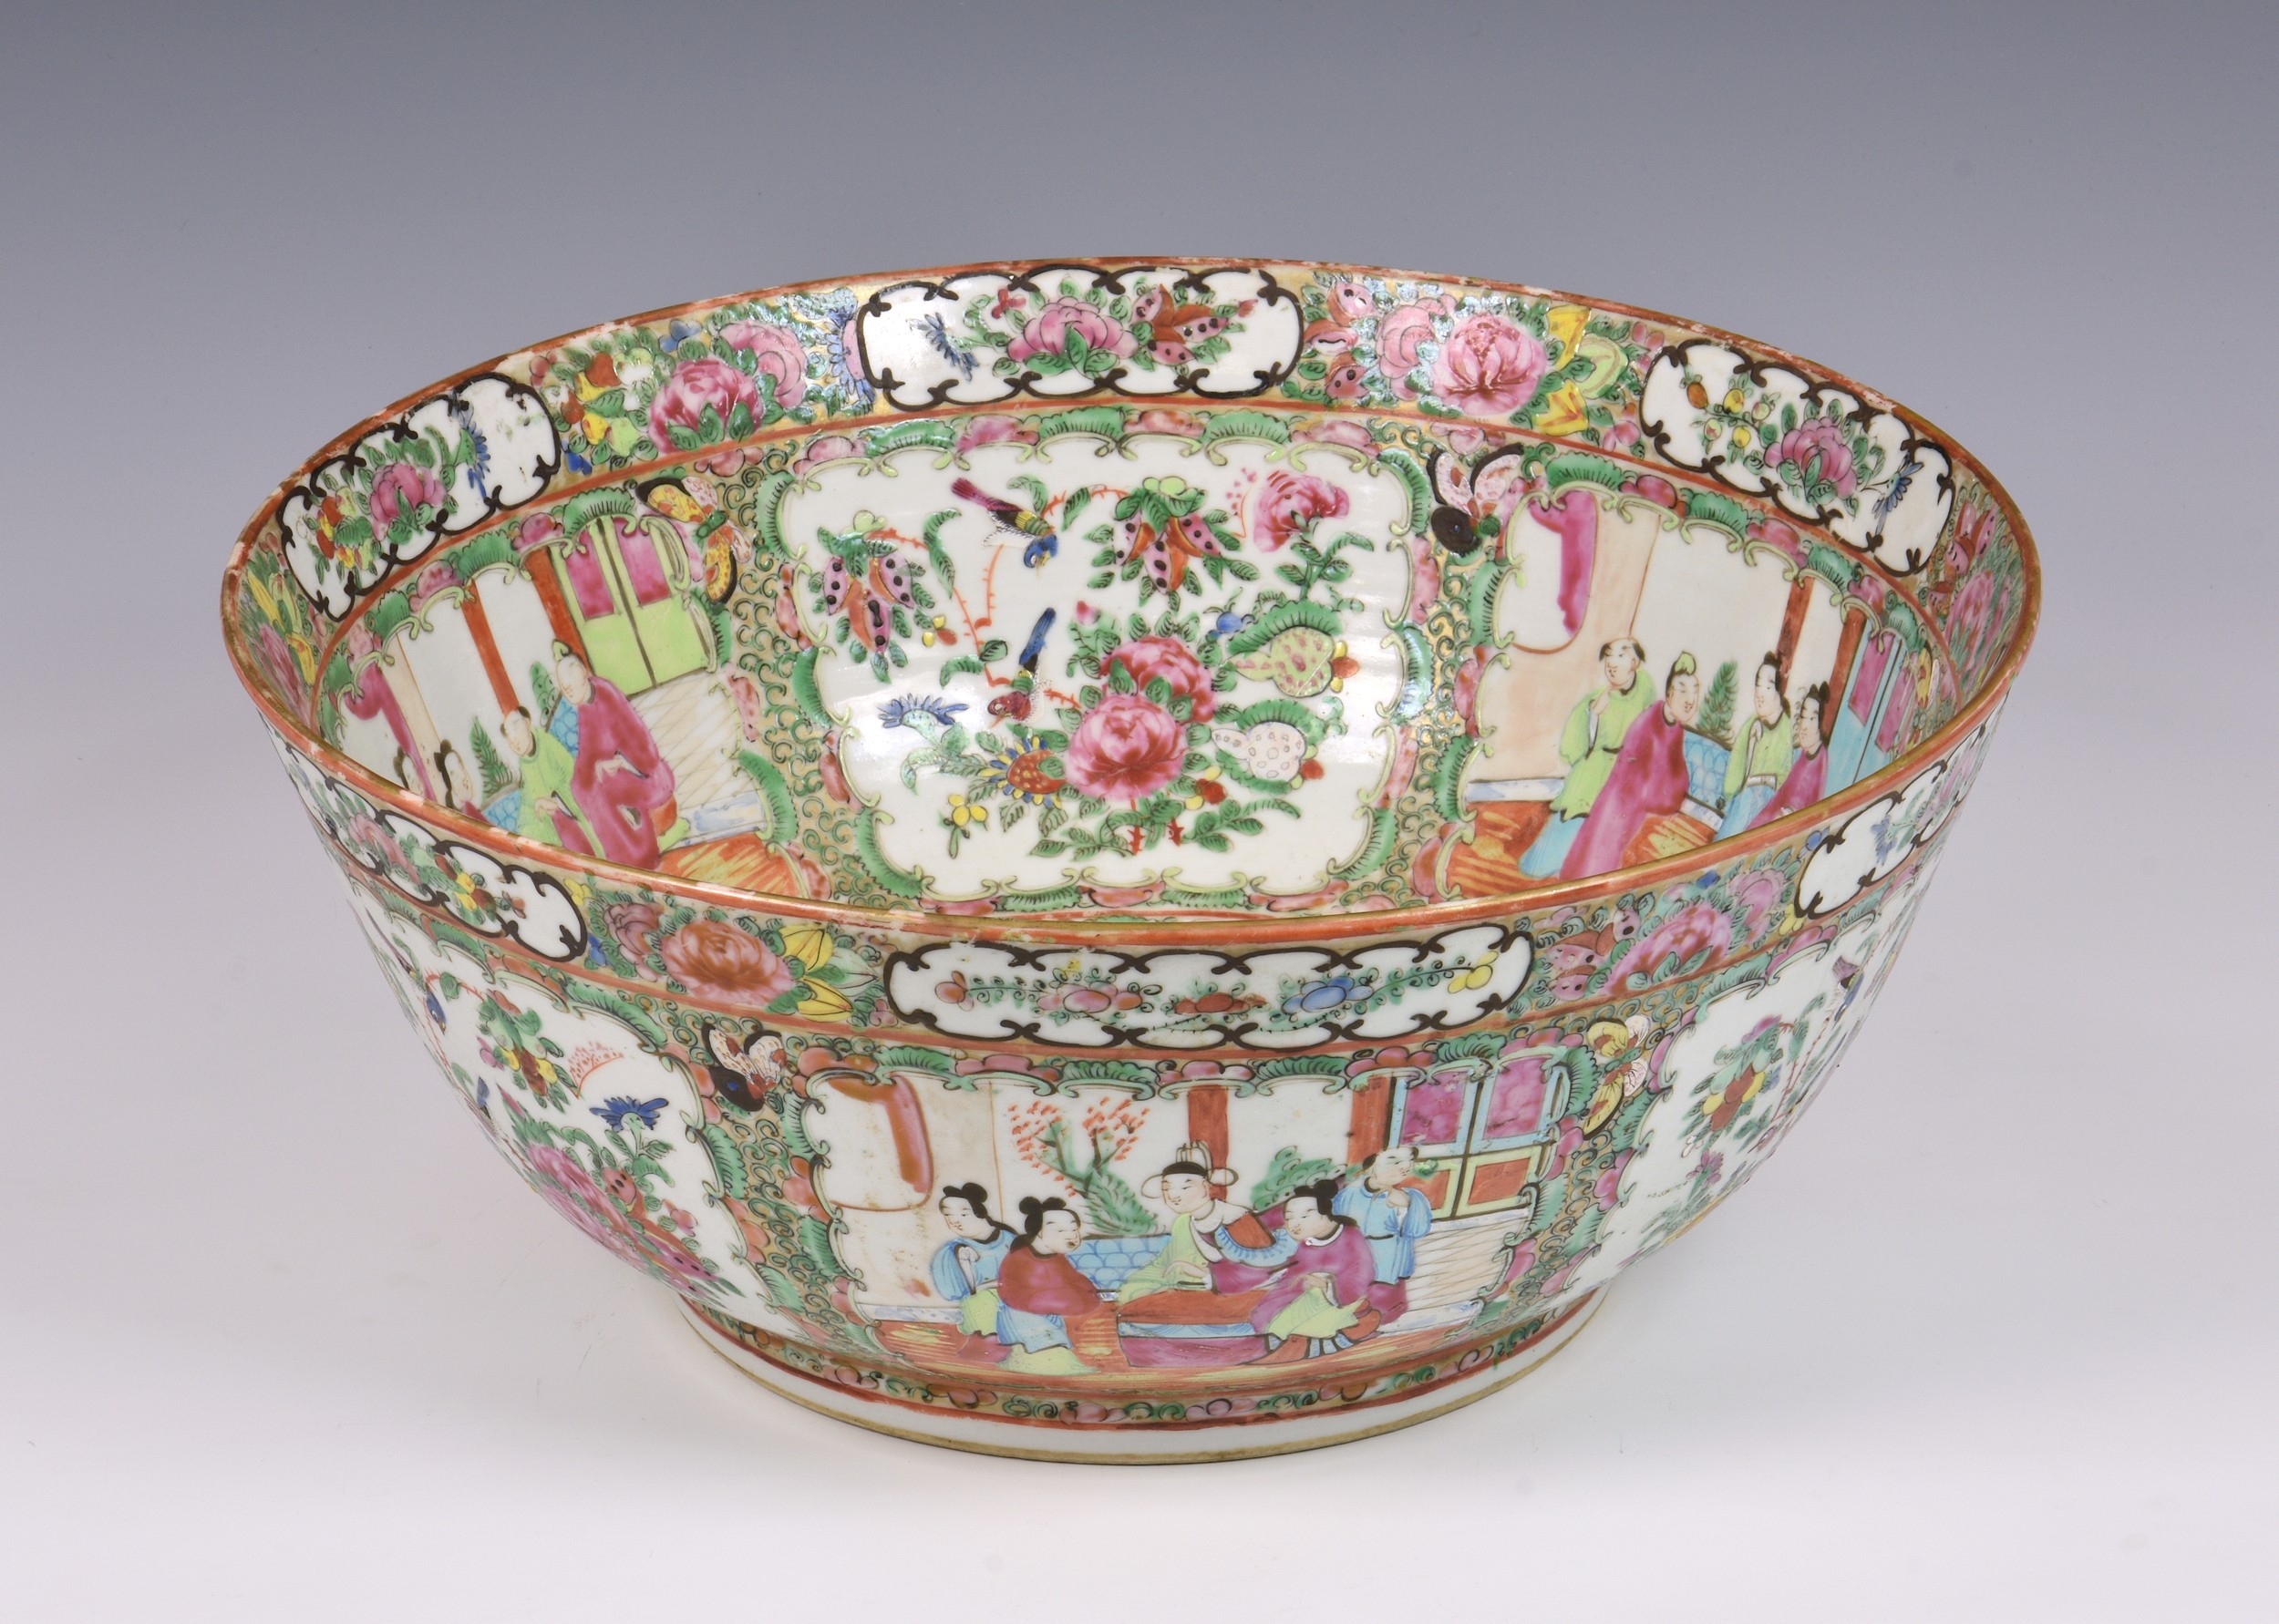 A large Chinese Canton famille rose punch bowl, 19th century, typically enamelled with alternate